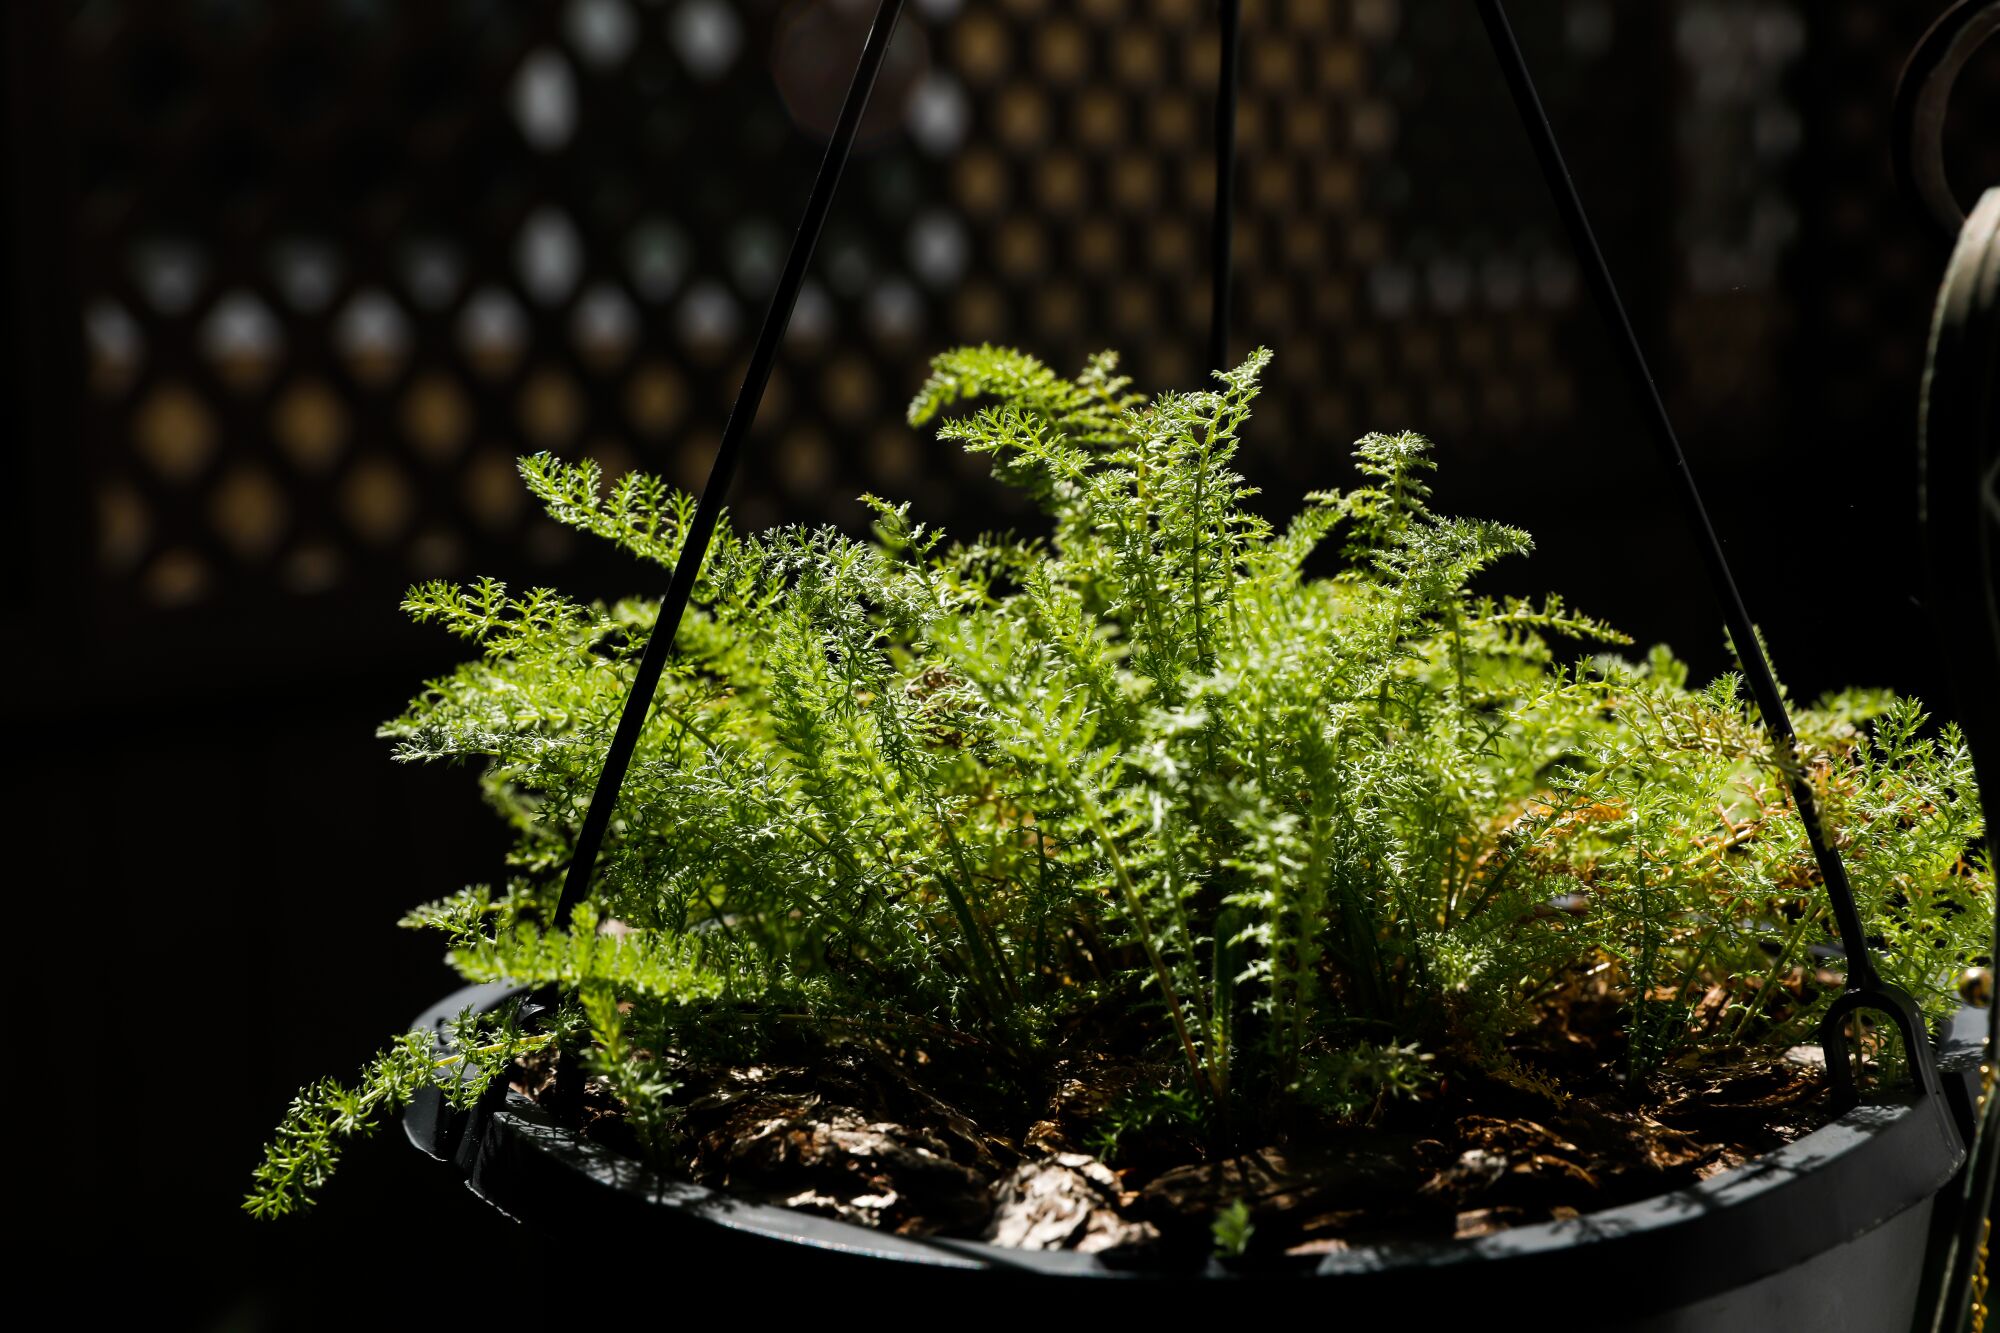 Sunlight catches the delicate tendrils of common yarrow leaves on Barbara Chung's patio.